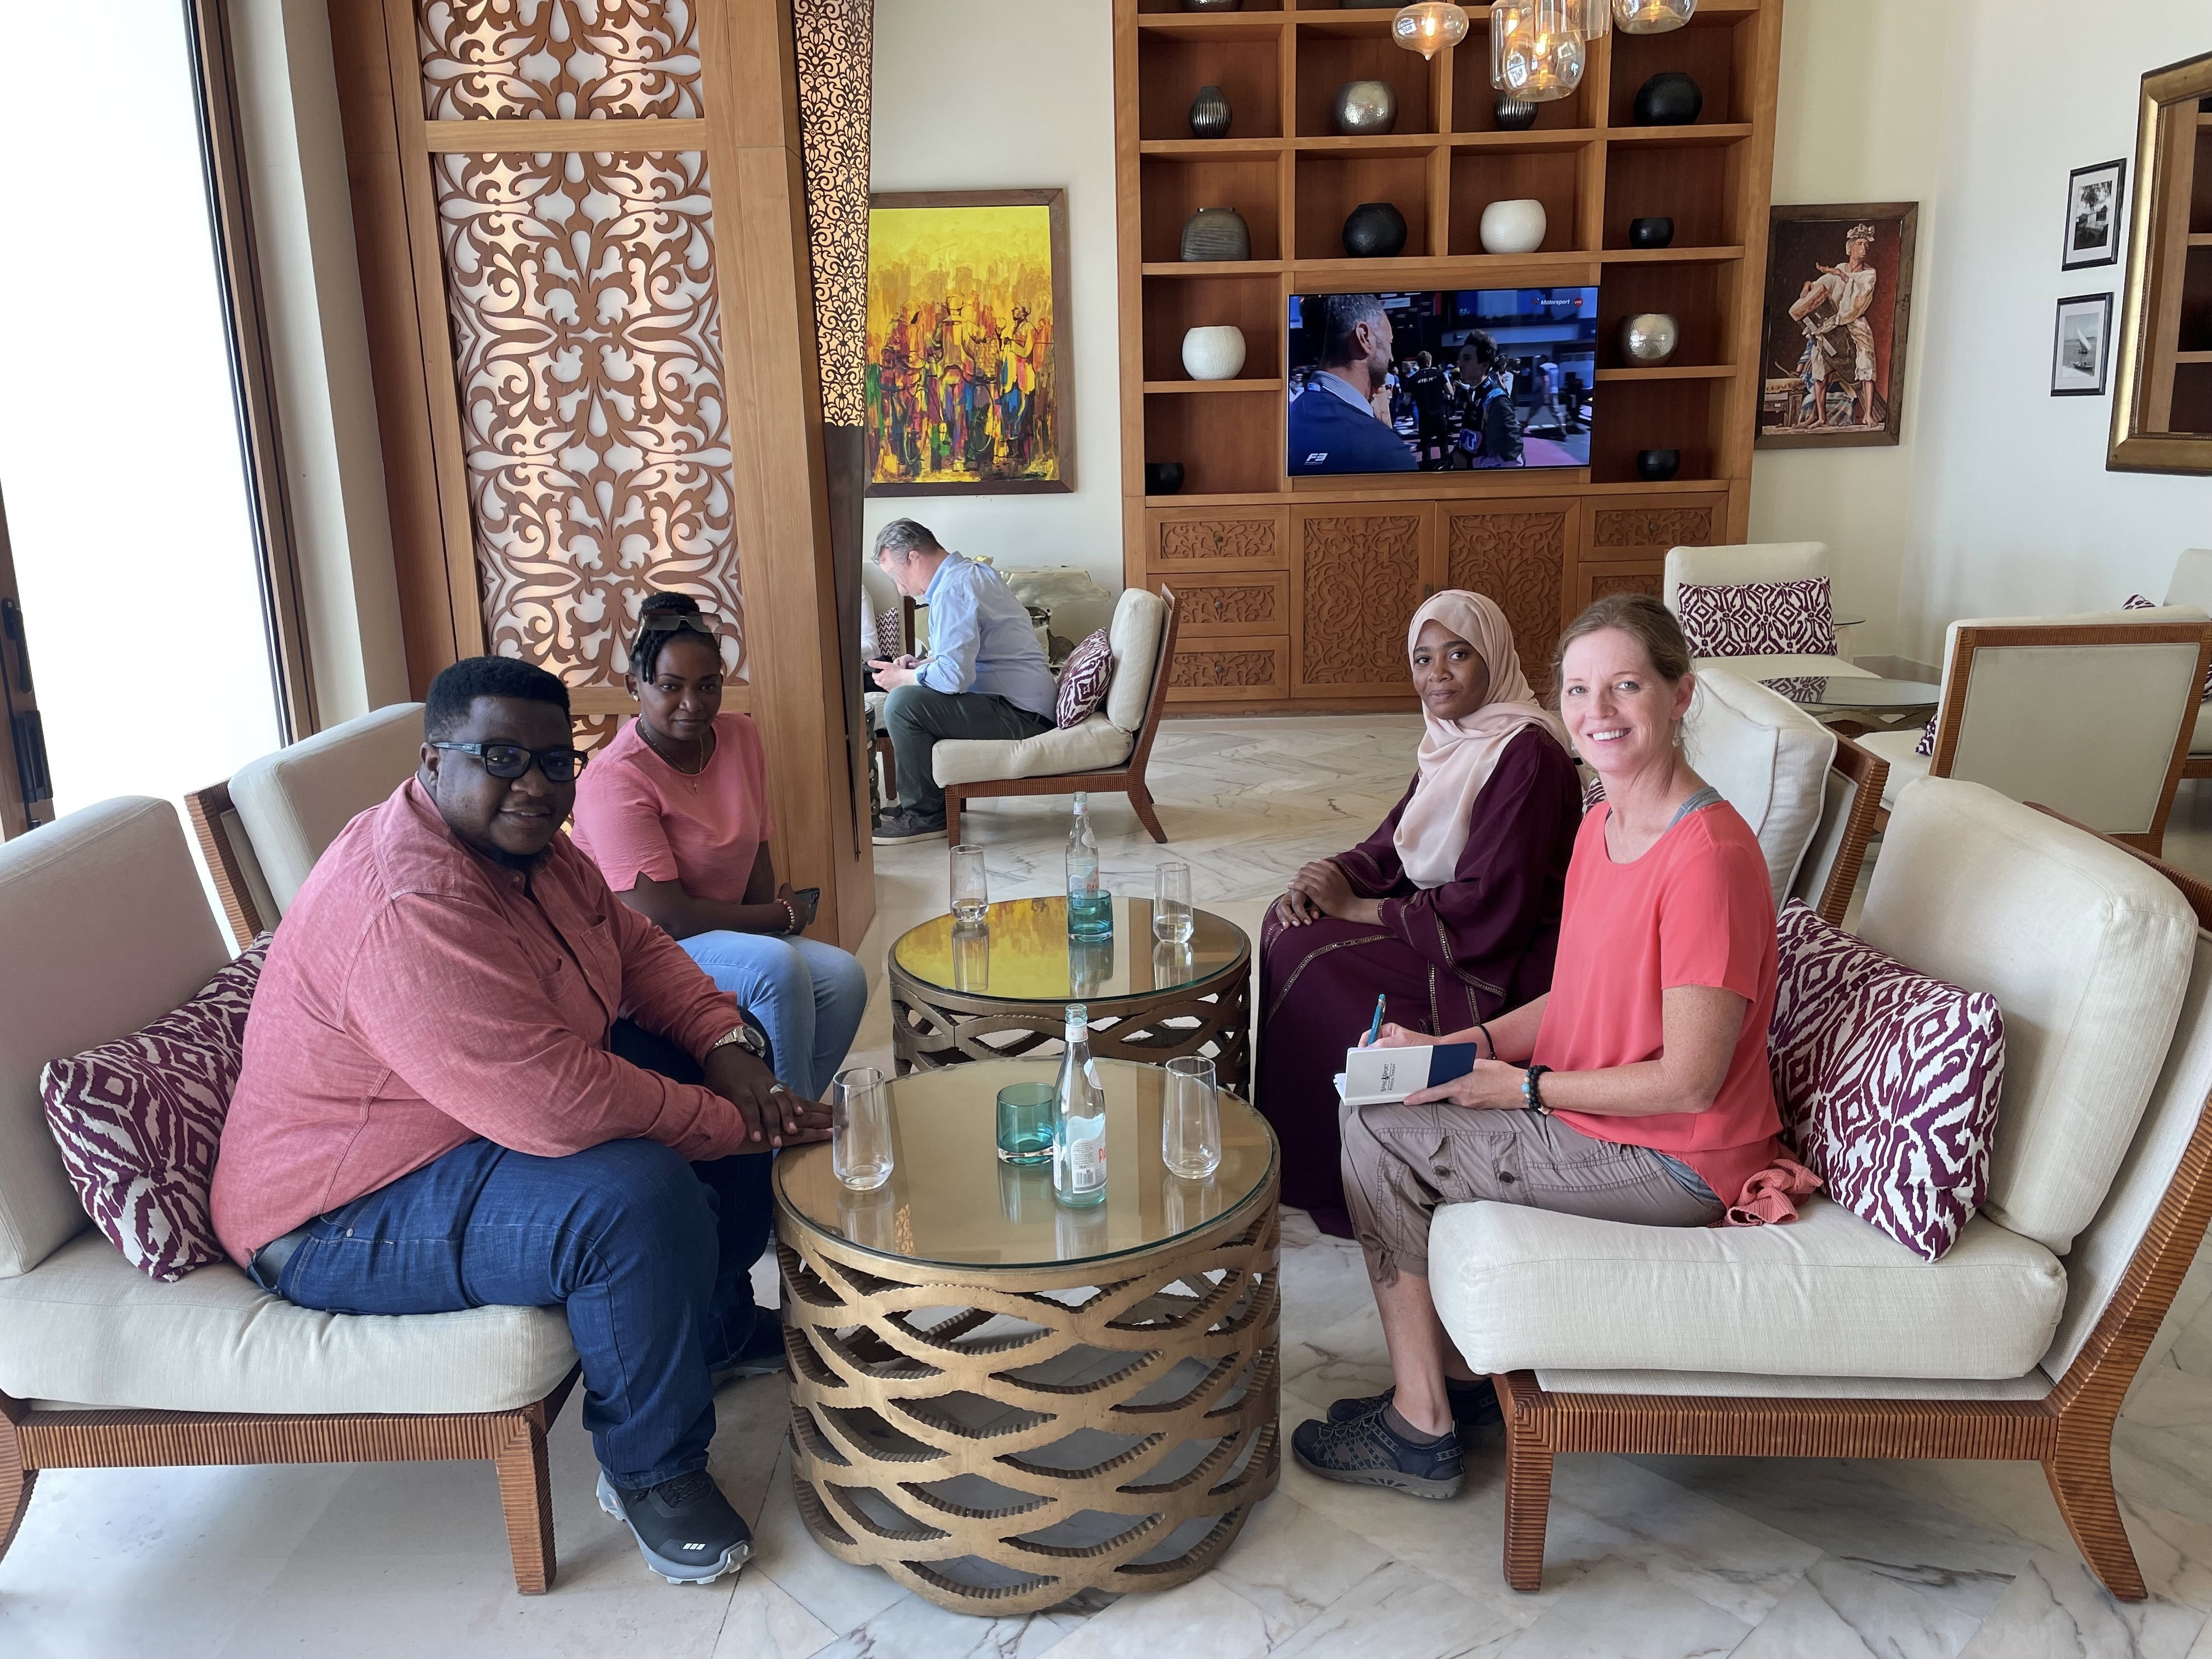 Four people, one Tanzanian man, two Tanzanian women, and one white, American woman with a notepad sit around coffee tables.